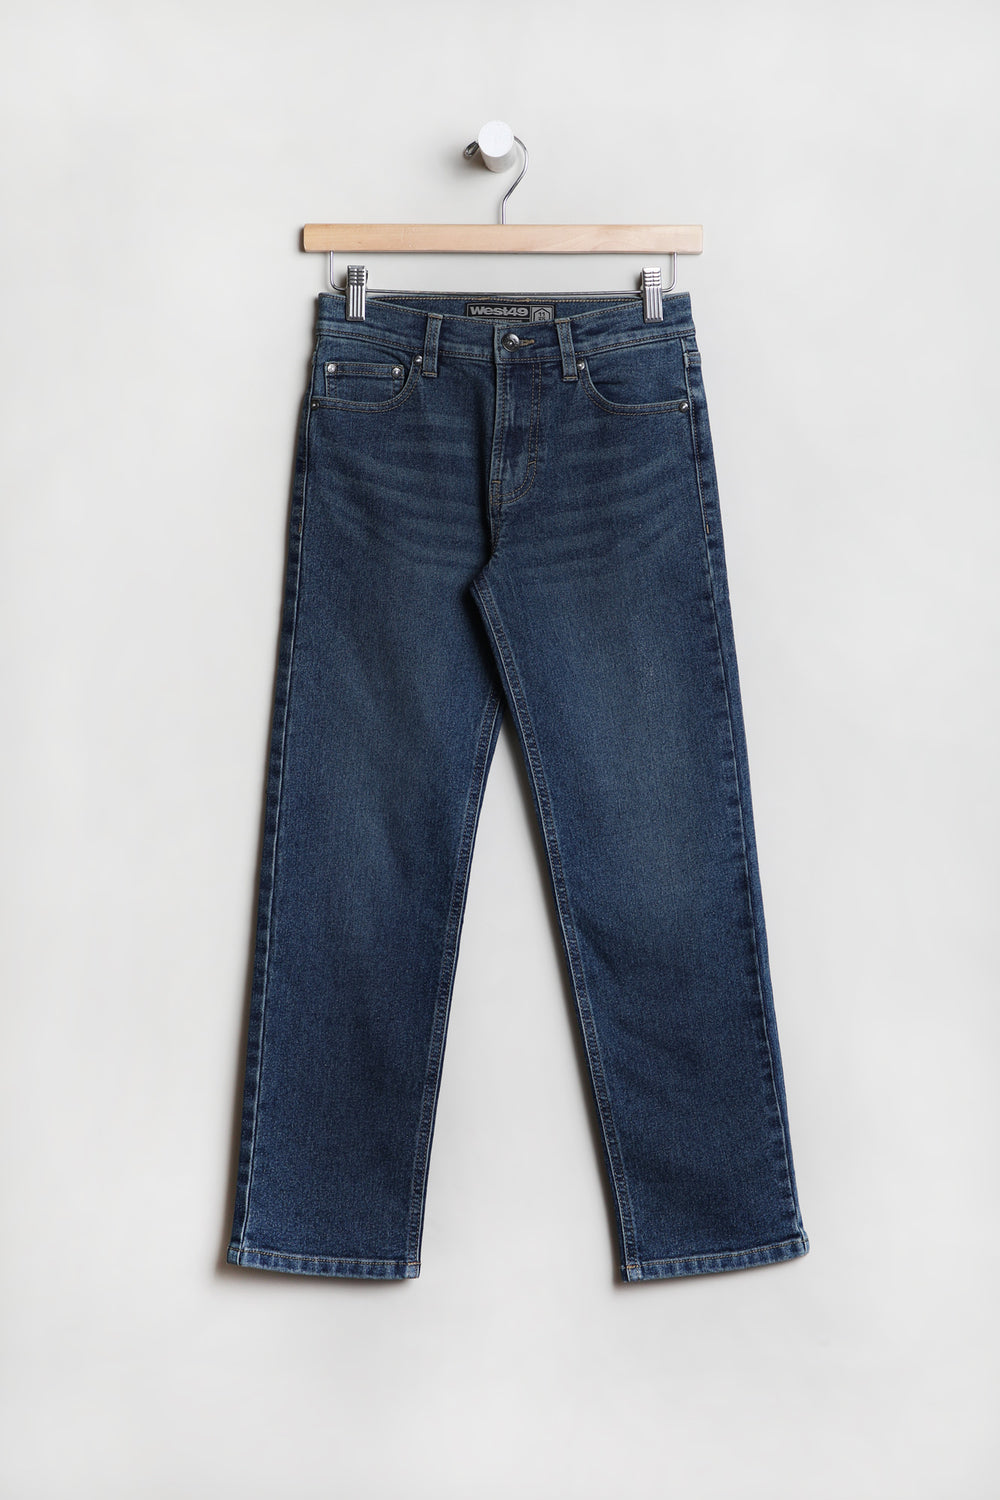 West49 Youth Dark Stone Relaxed Jeans West49 Youth Dark Stone Relaxed Jeans